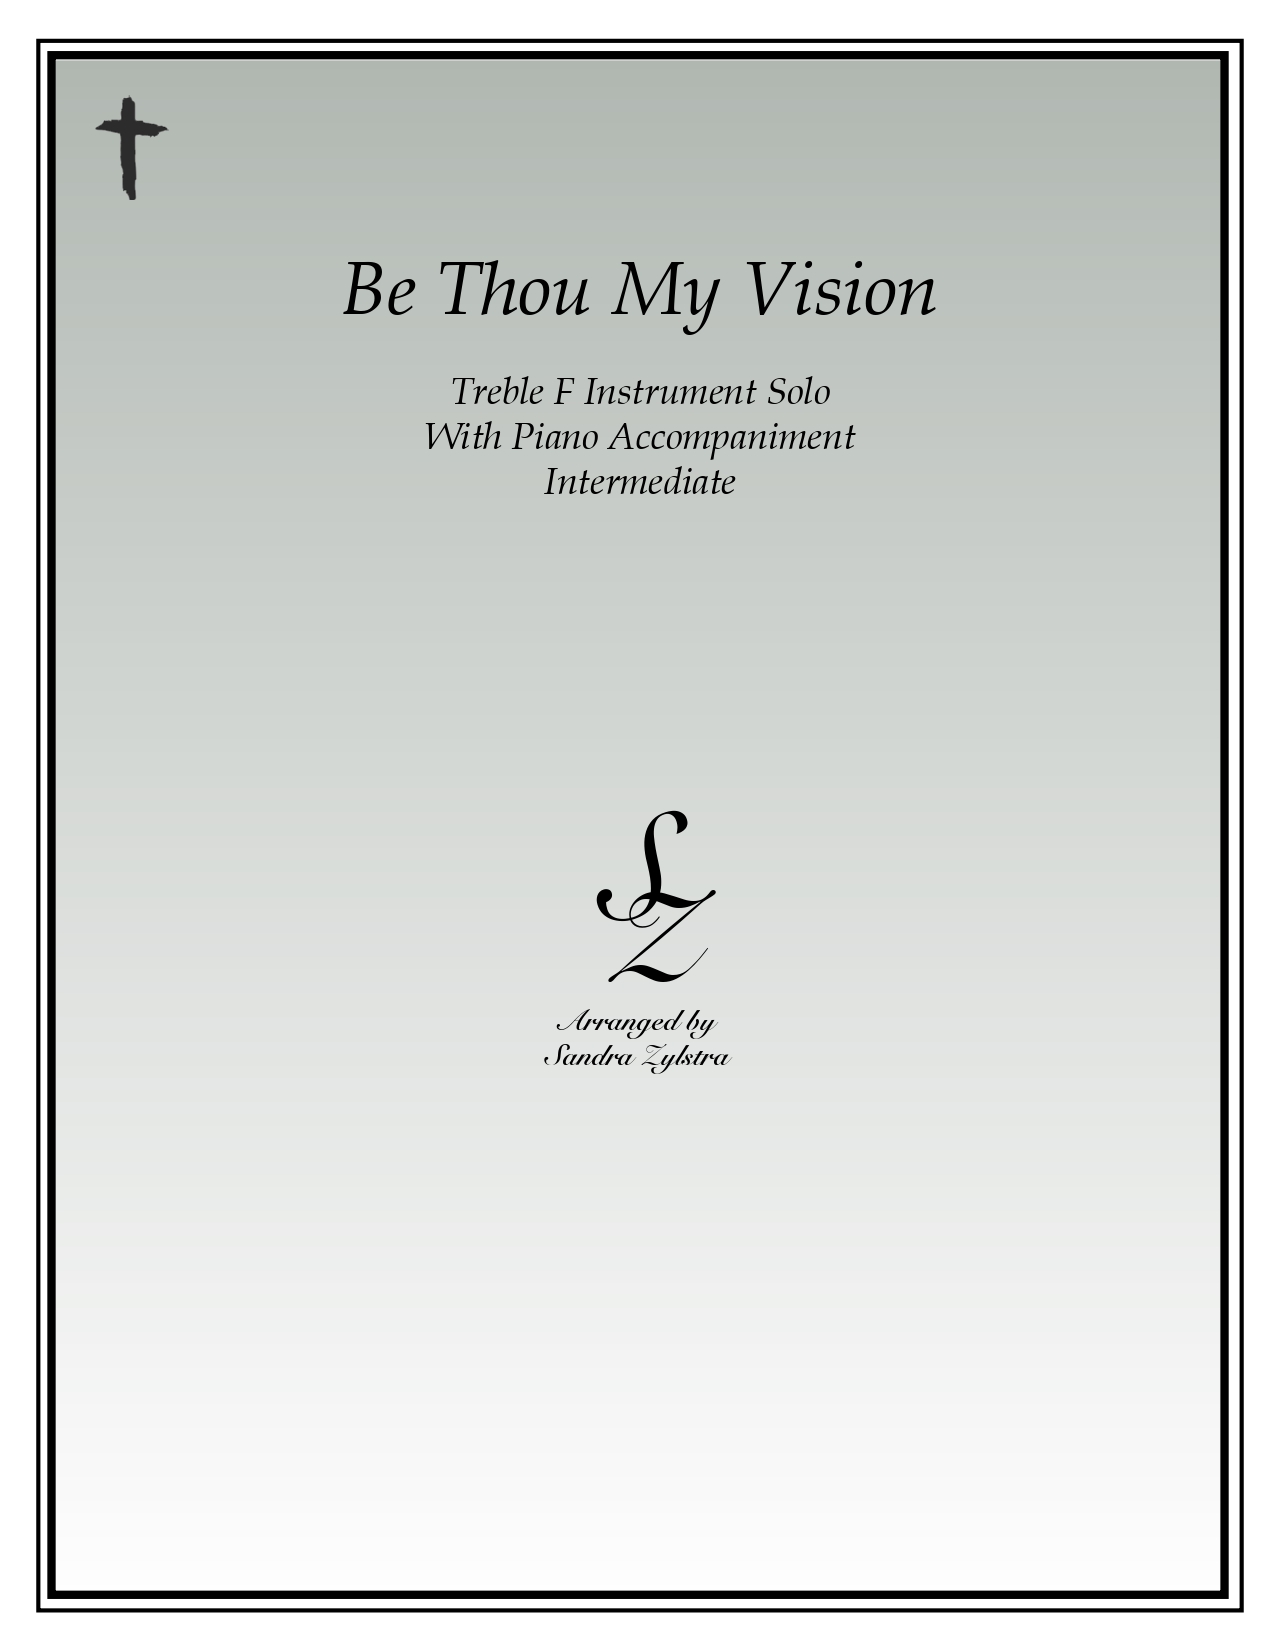 Be Thou My Vision F instrument solo part cover page 00011